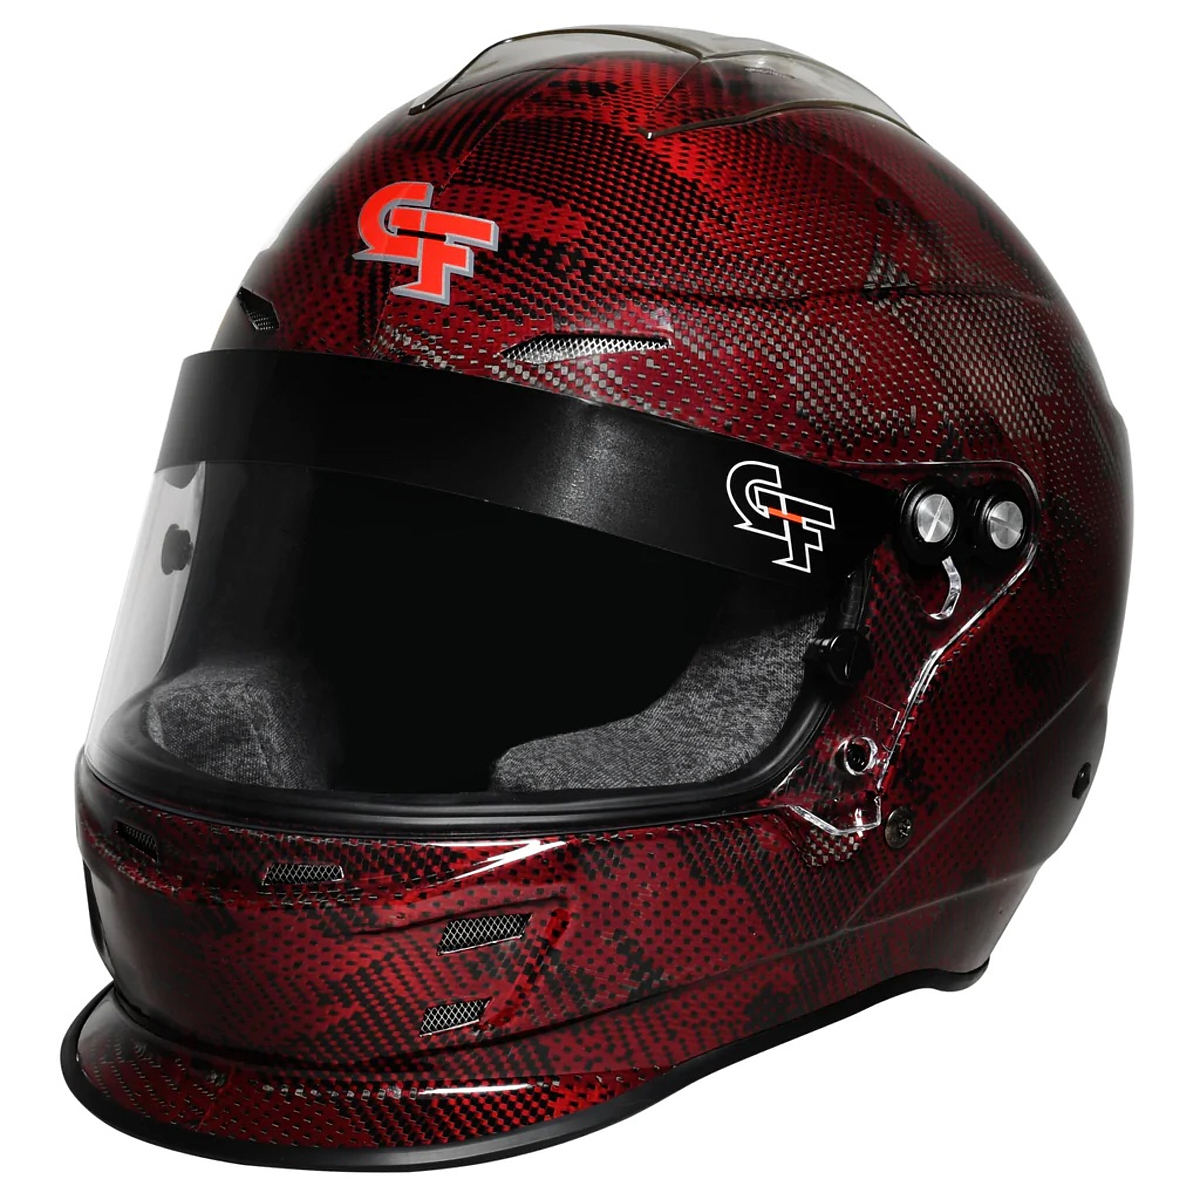 G-Force Racing Gear 16005LRGRD Helmet, Nova Fusion, Full Face, Snell SA 2020, Head and Neck Support Ready, Red, Large, Each